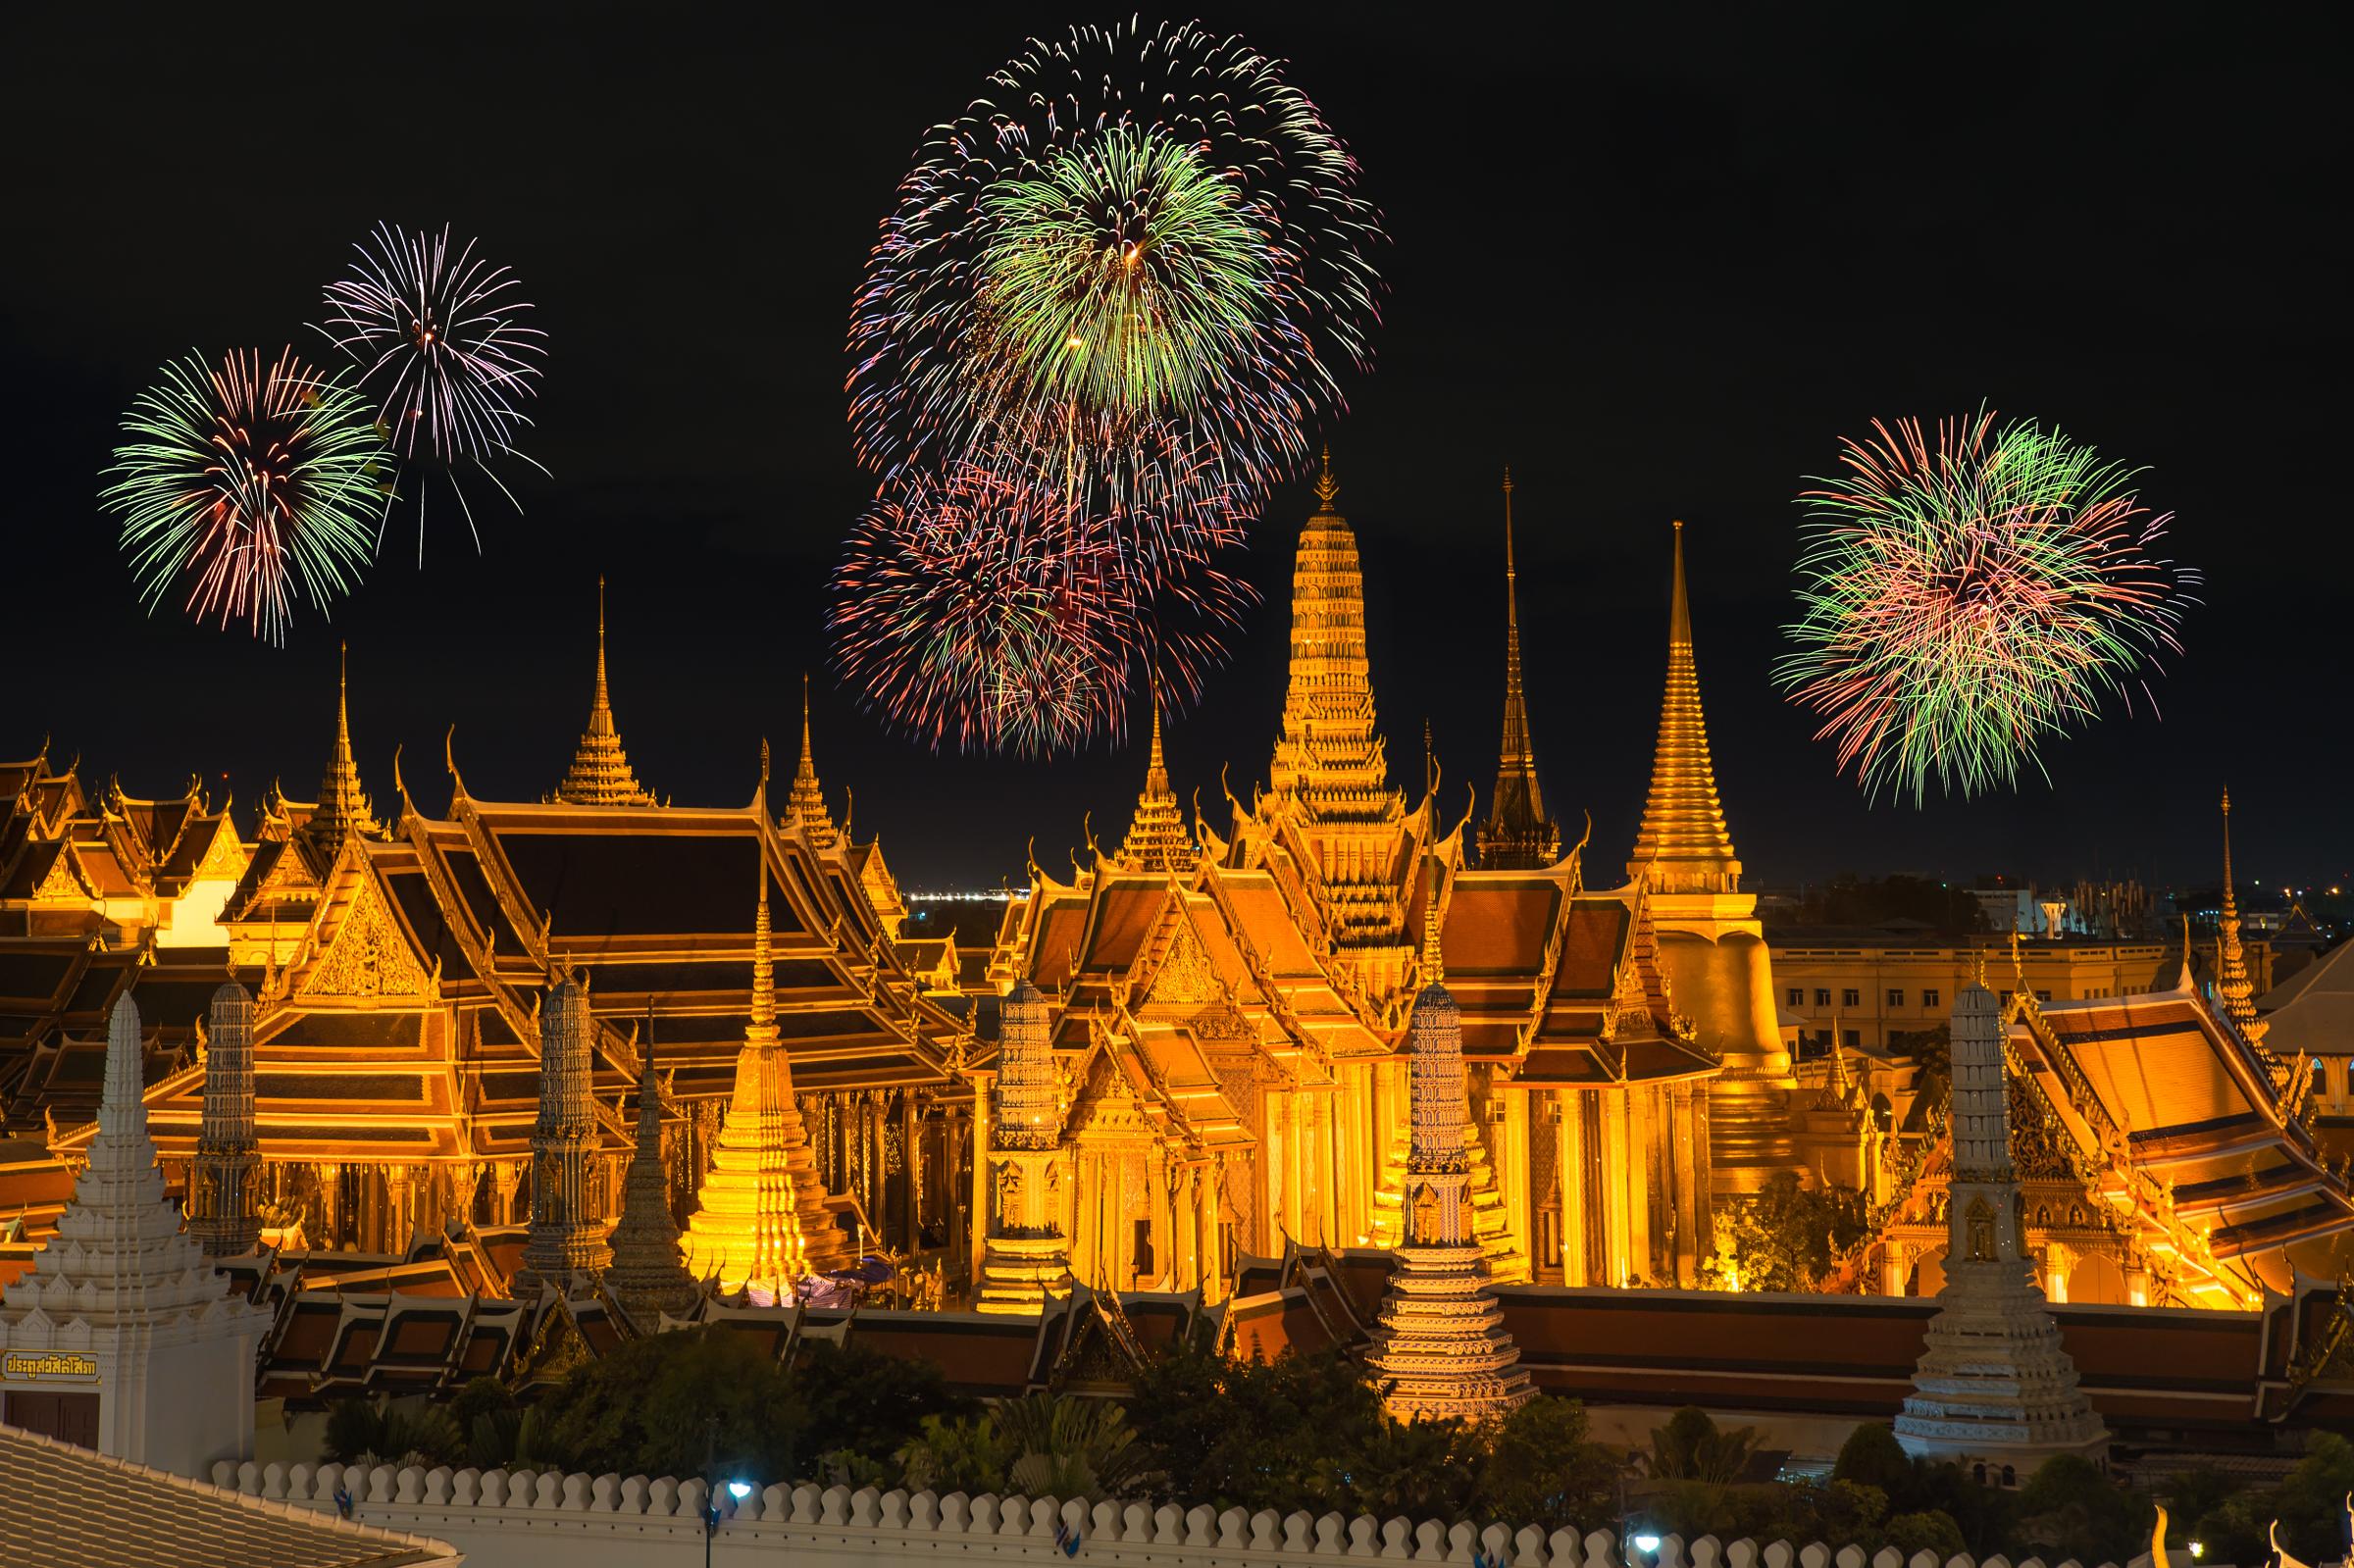 Grand palace and Wat phra keaw in night